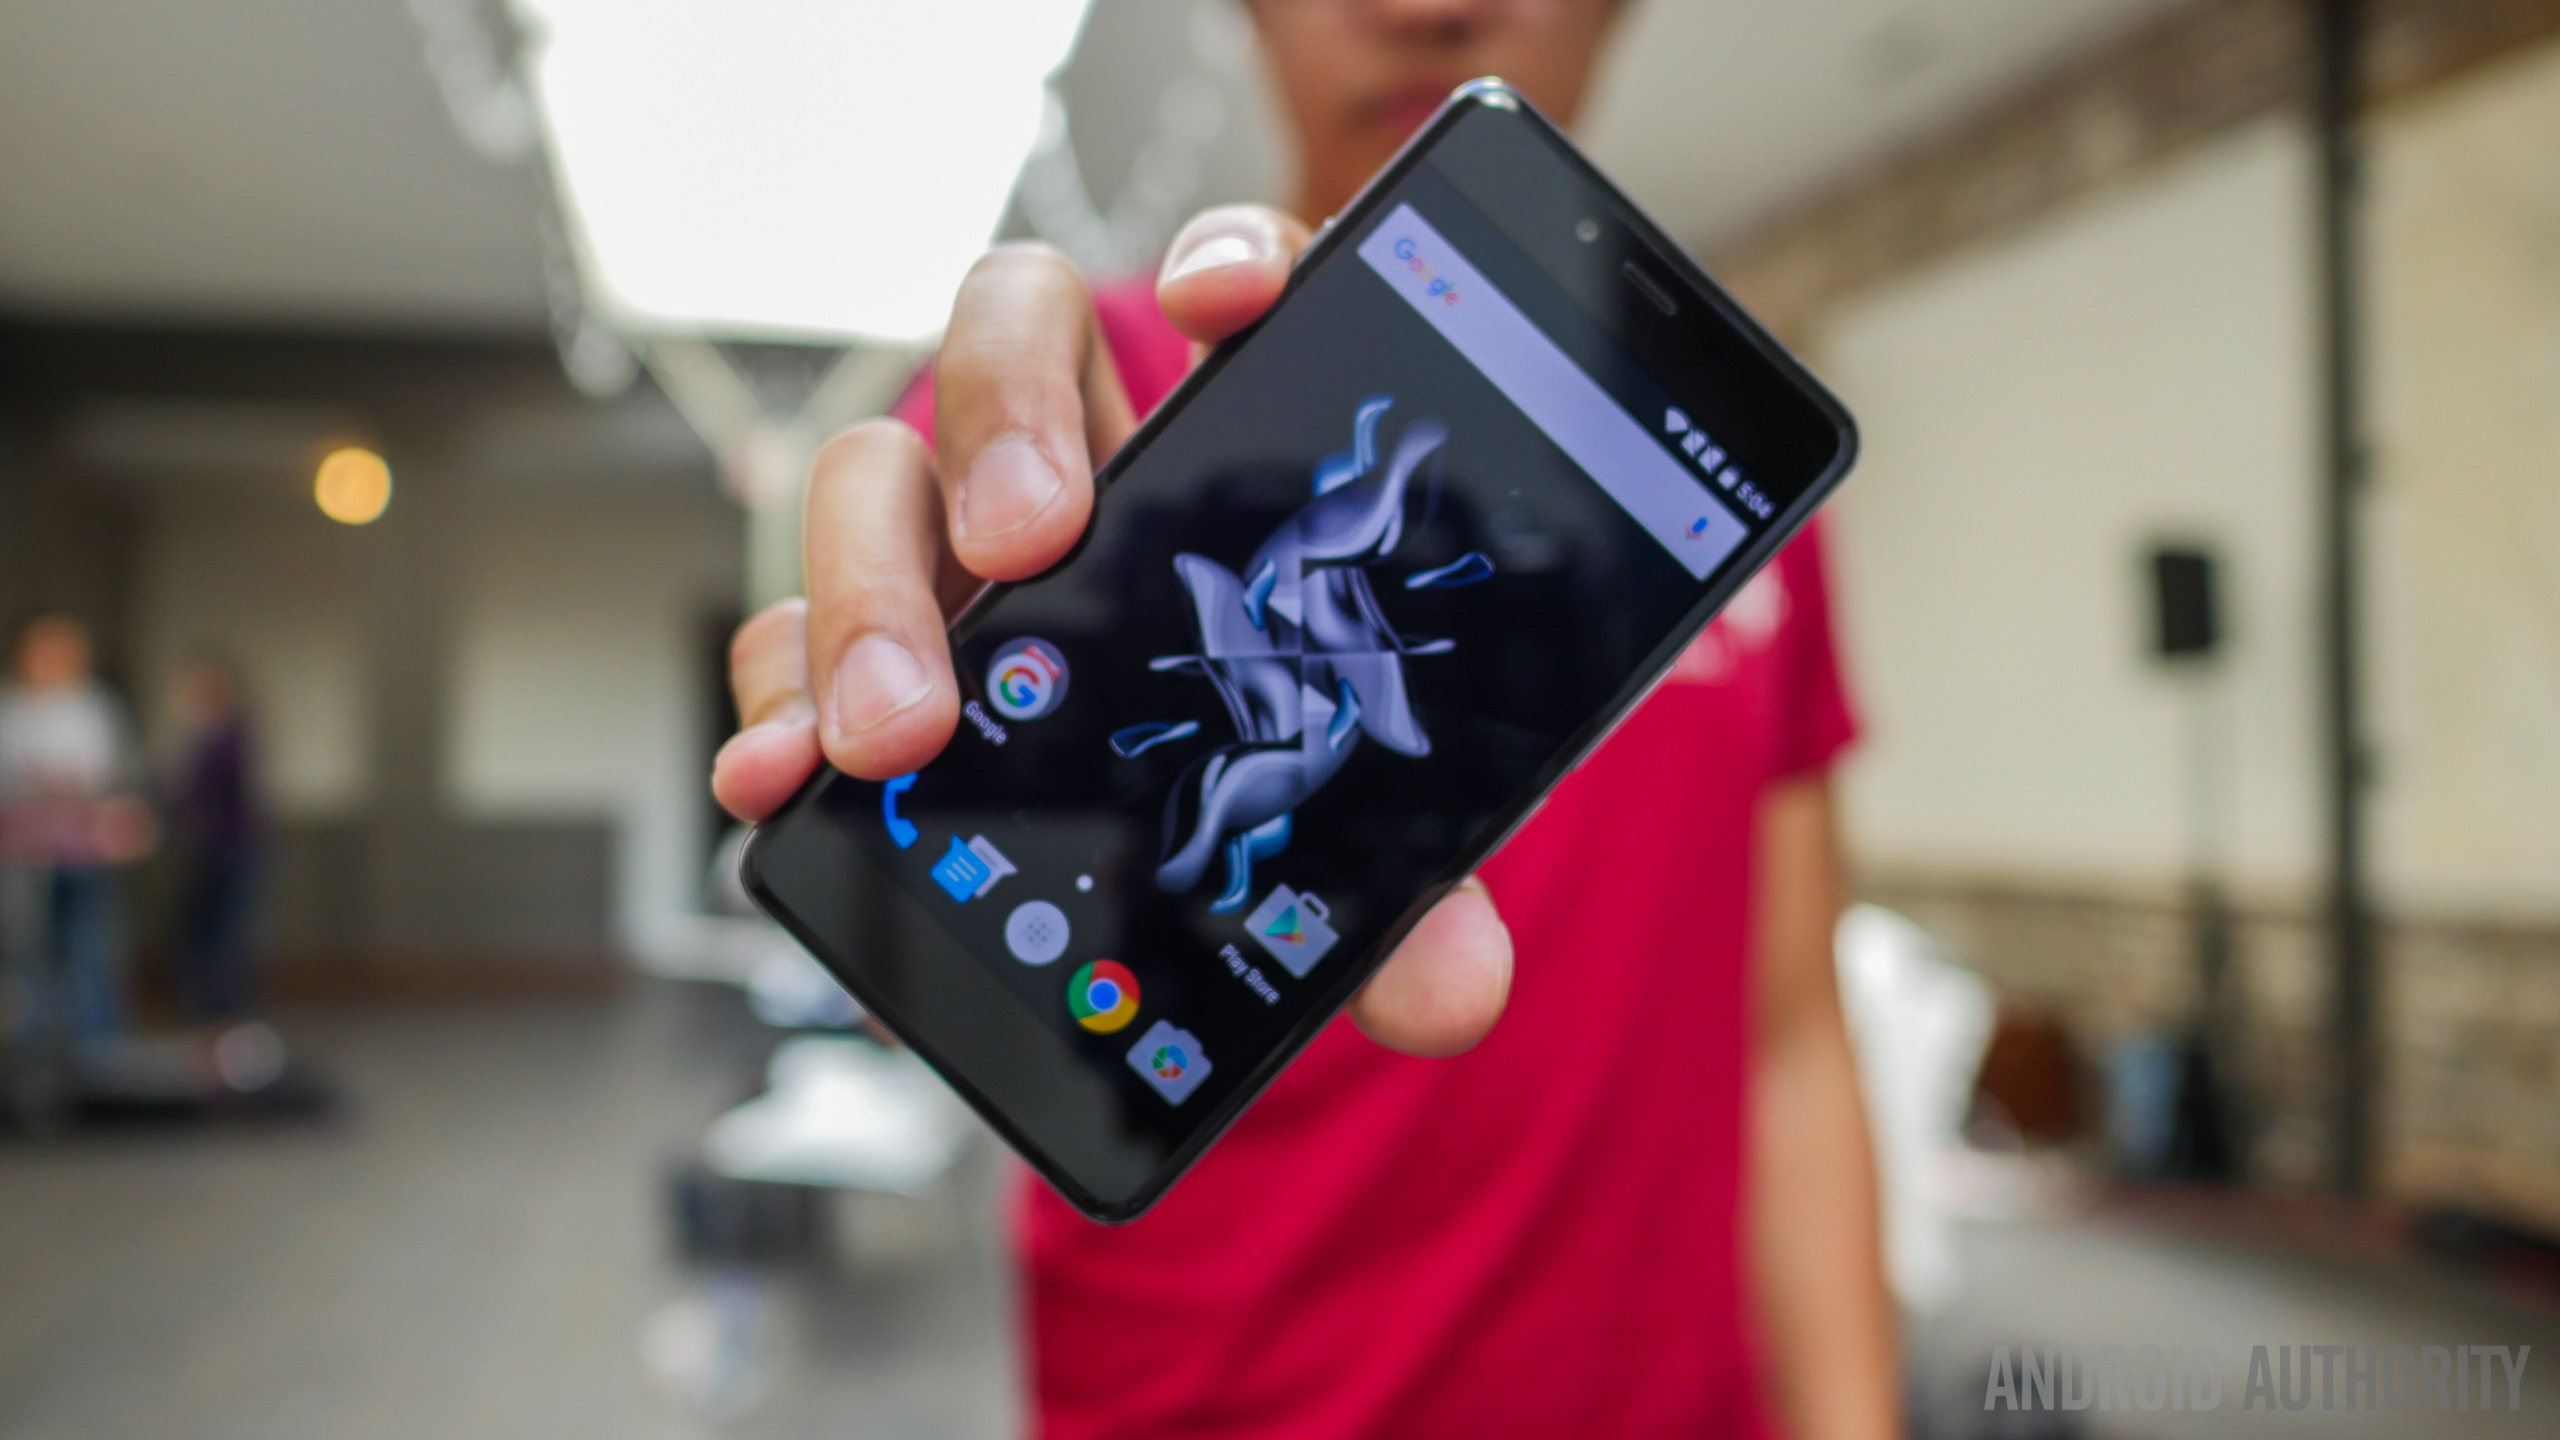 oneplus x first look aa (36 of 47)